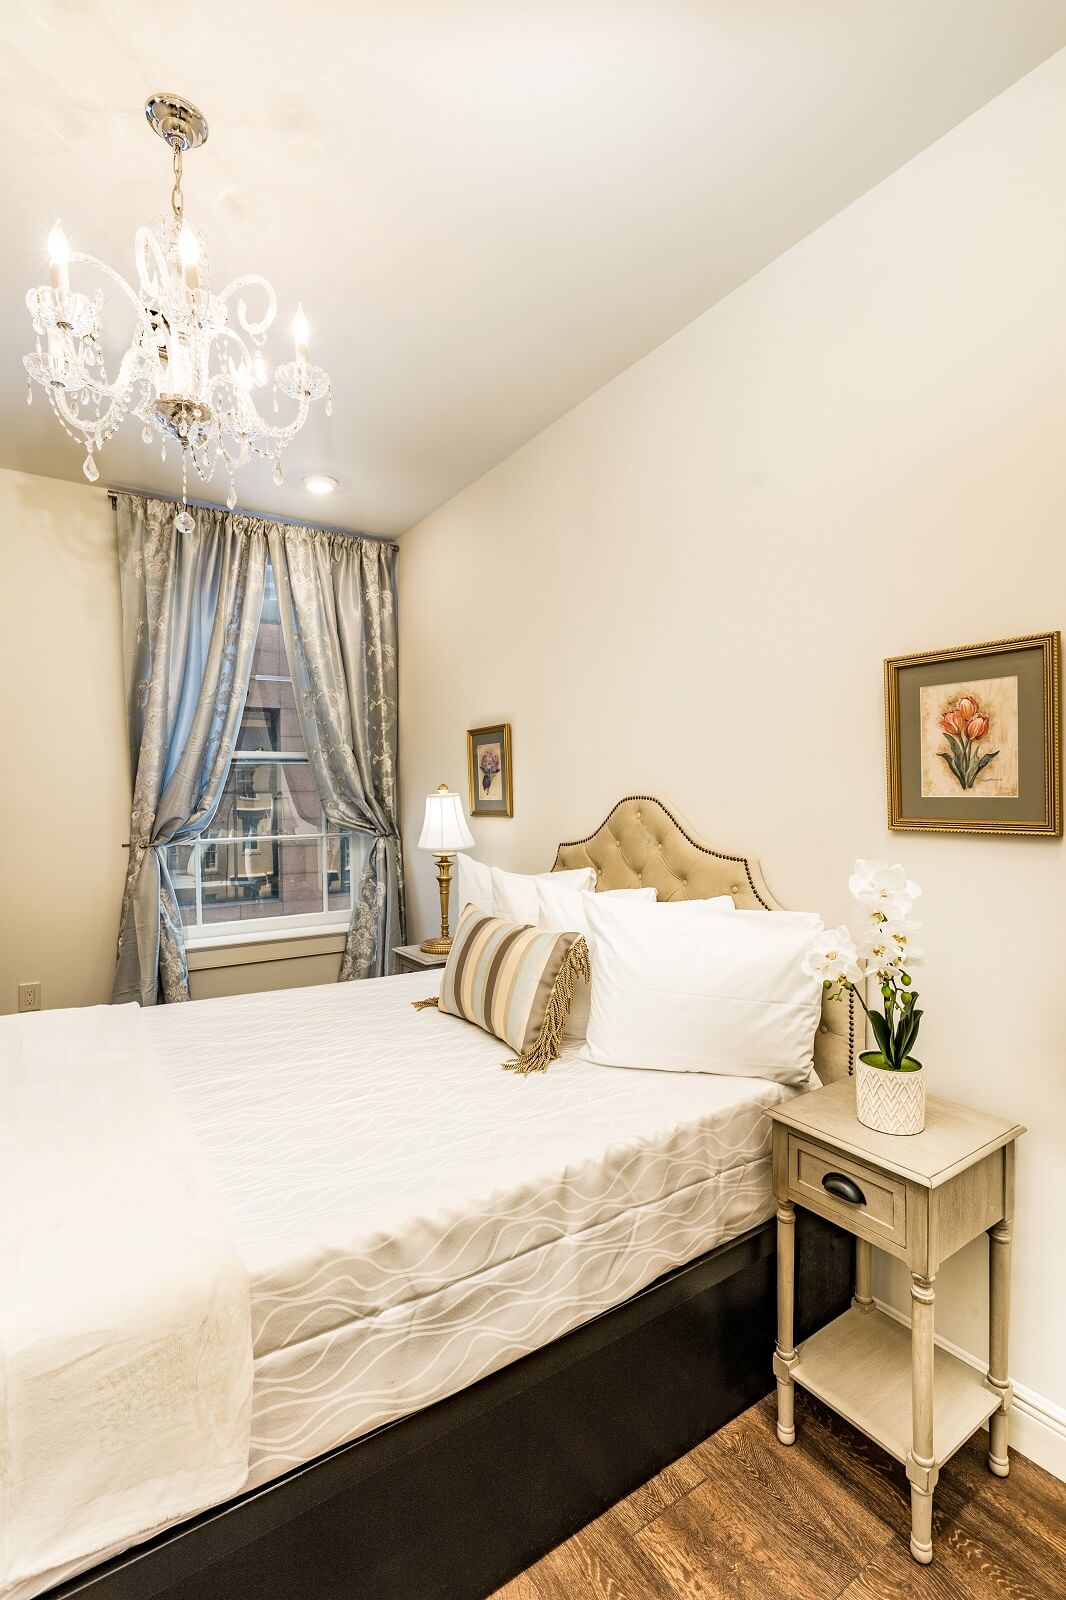 The Alexandre Unit 405 bedroom, a New Orleans luxury rental.